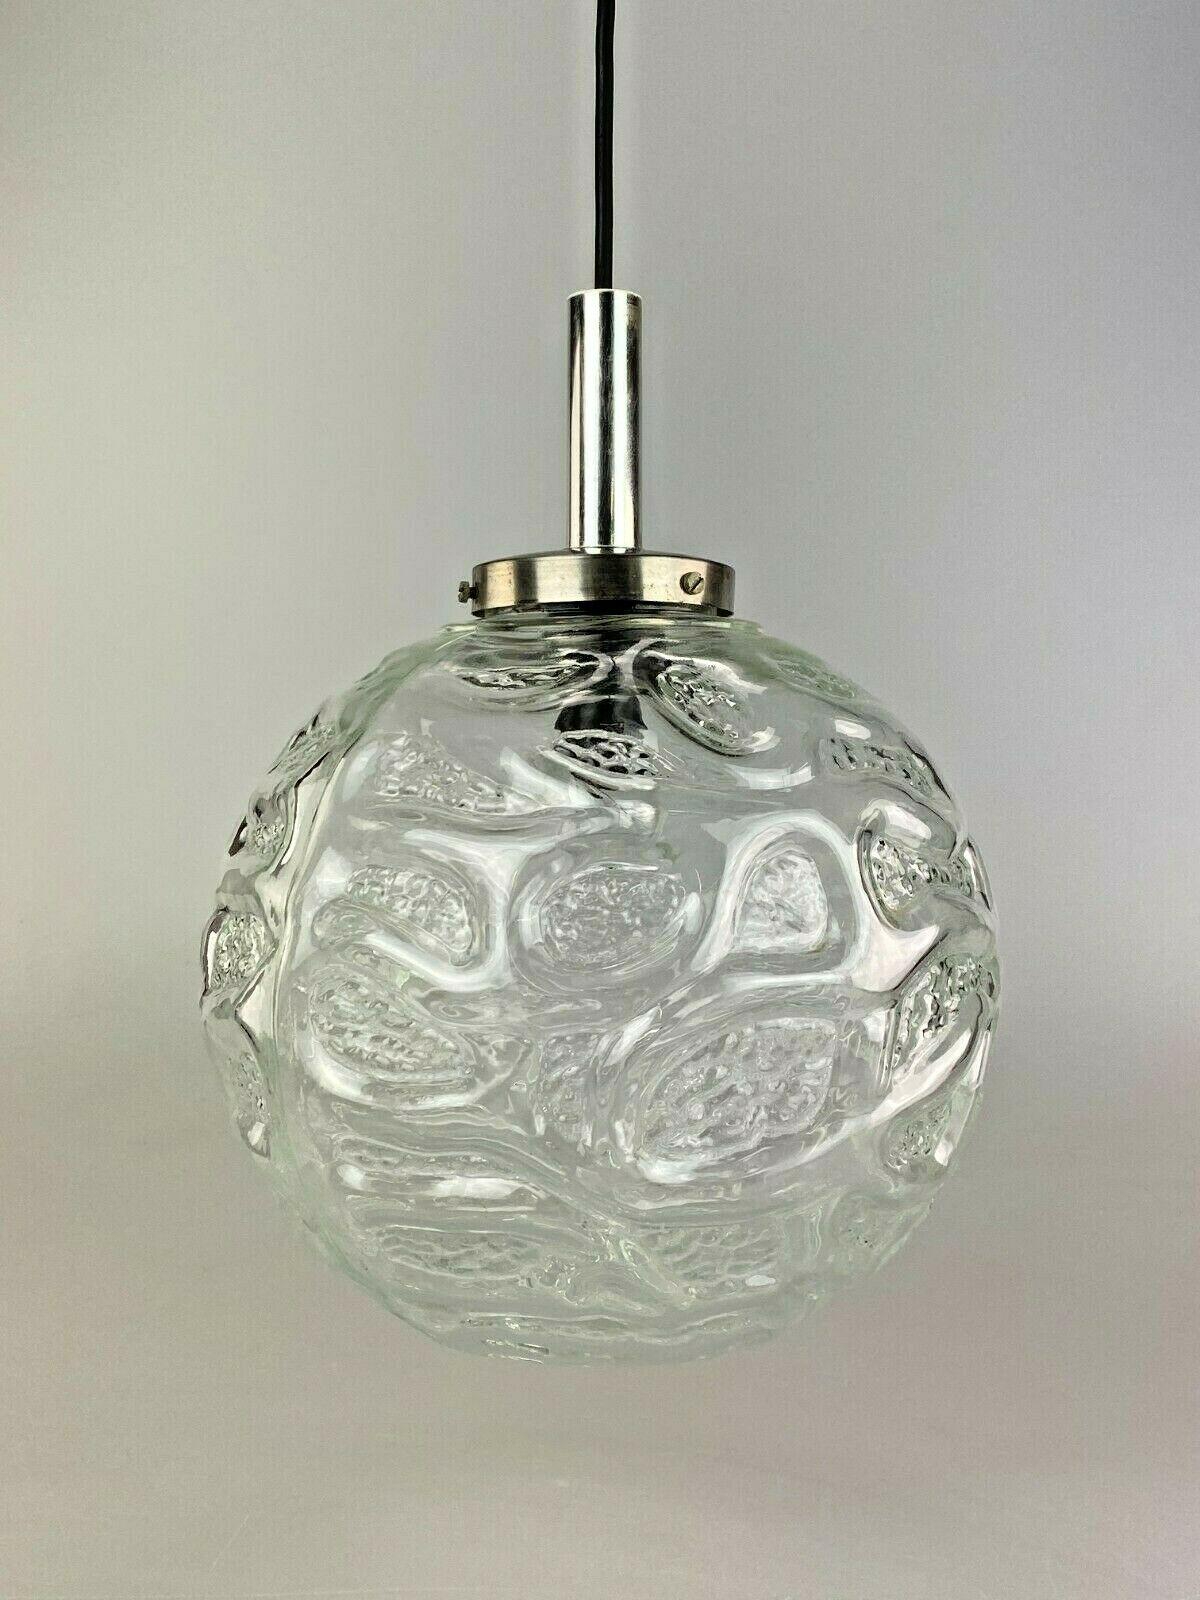 70s lamp lamp ball lamp hanging lamp glass ceiling lamp space age design

Object: spherical lamp

Manufacturer:

Condition: good

Age: around 1960-1970

Dimensions:

Diameter = 25cm
Hanging height = 60cm

Other notes:

The pictures